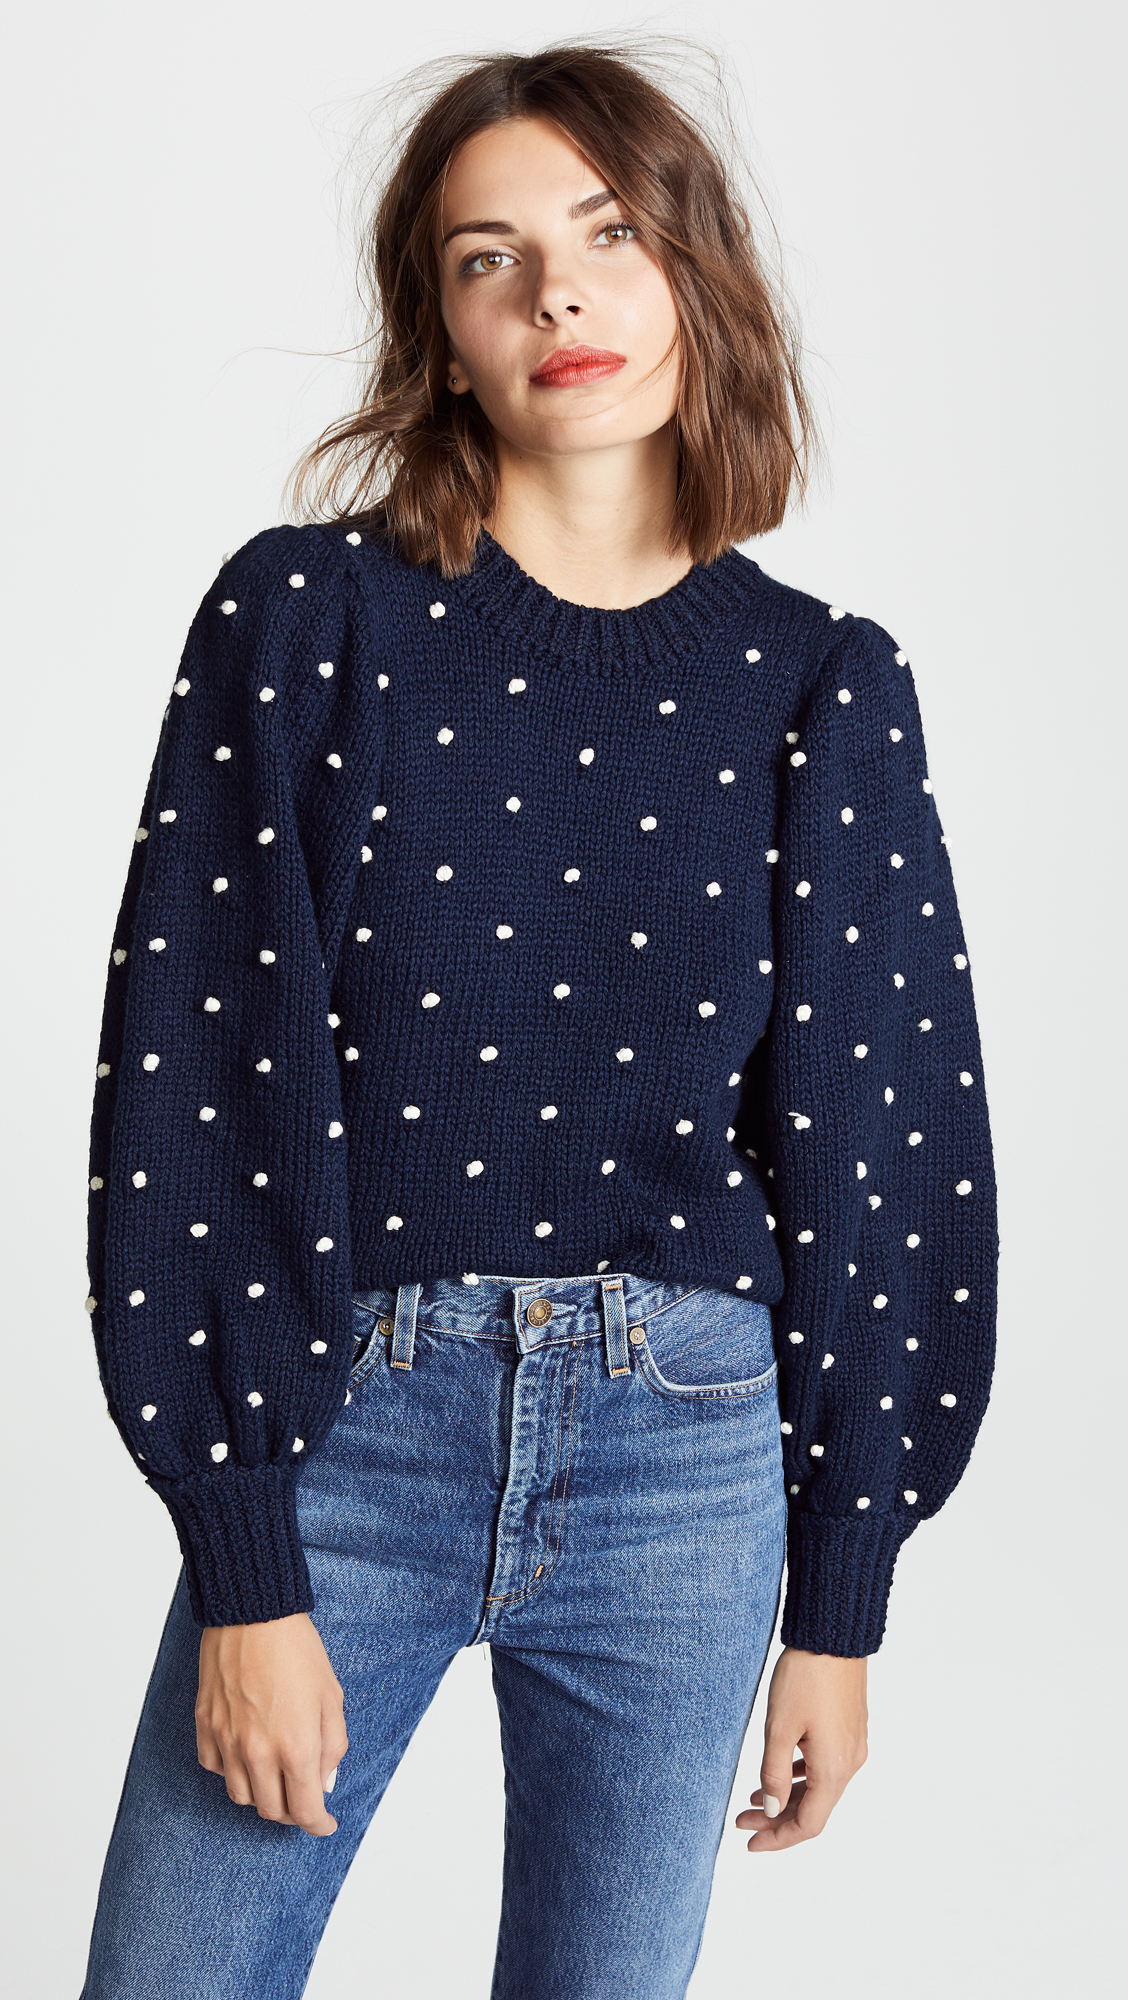 Navy Blue Polka Dot Embroidered Sweater